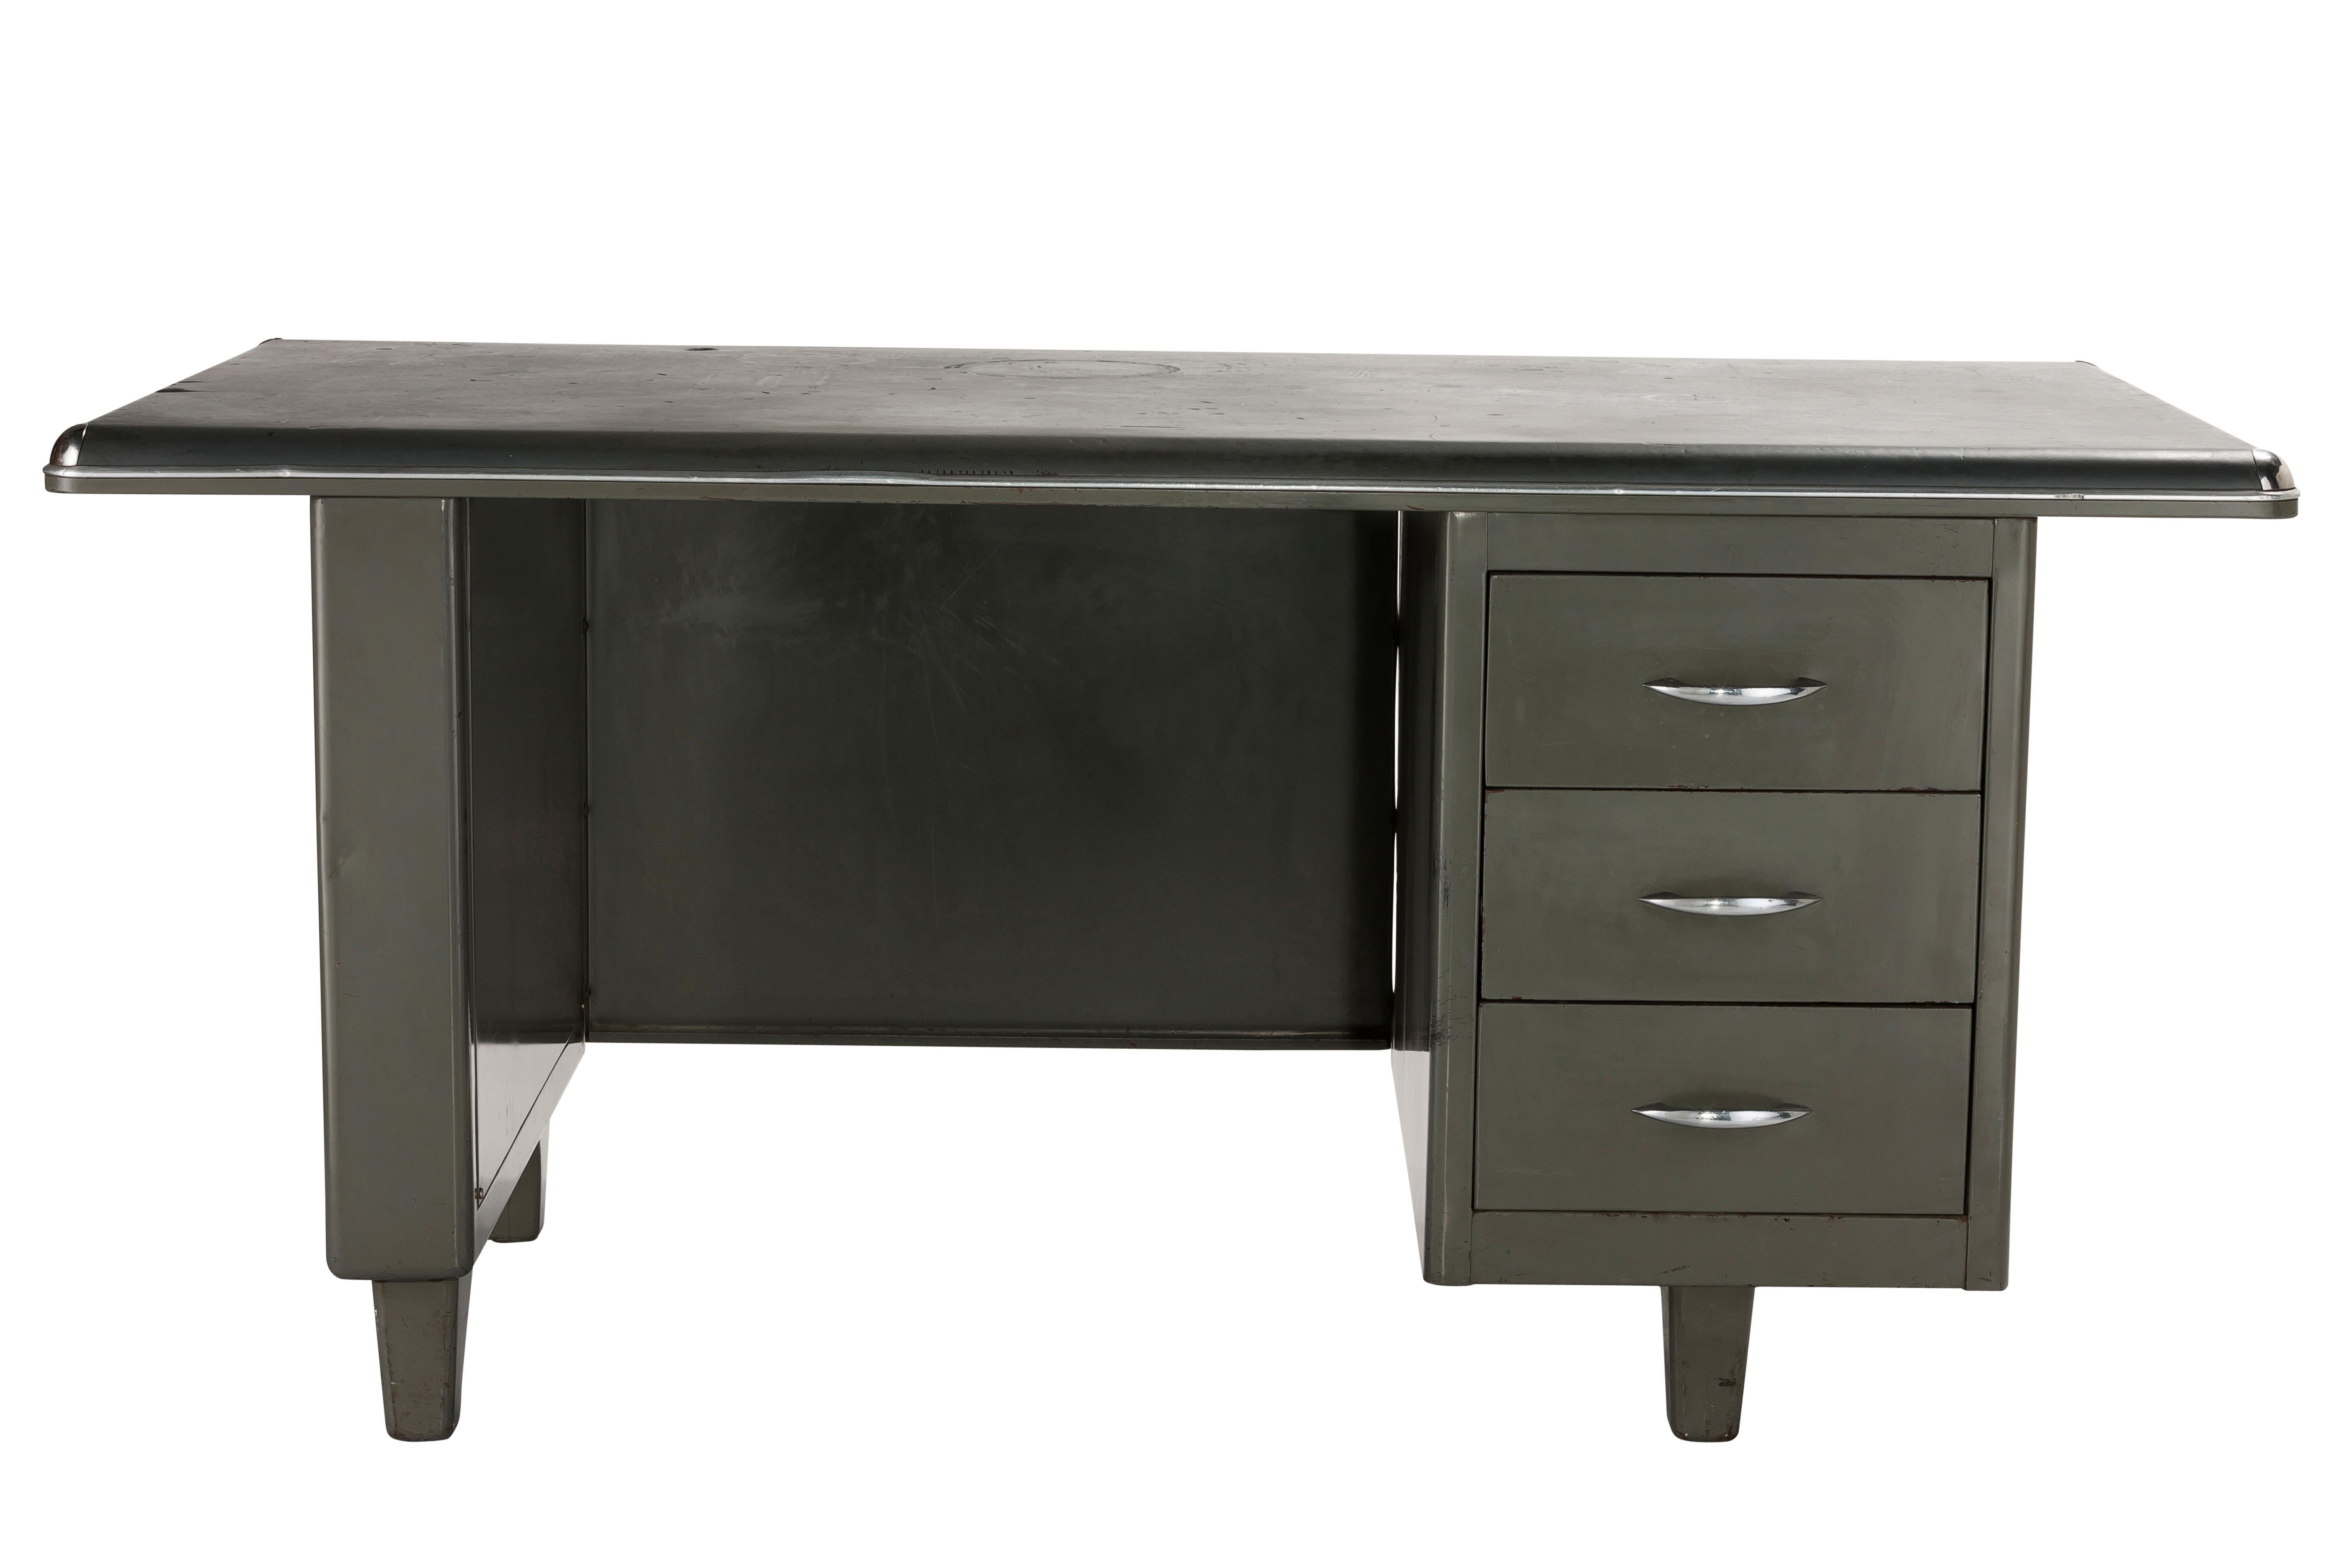 Unrestored tanker steel desk in grey with pontoon style legs. Original feet are adjustable. The item has been sourced from an architectural office operating in South Africa.